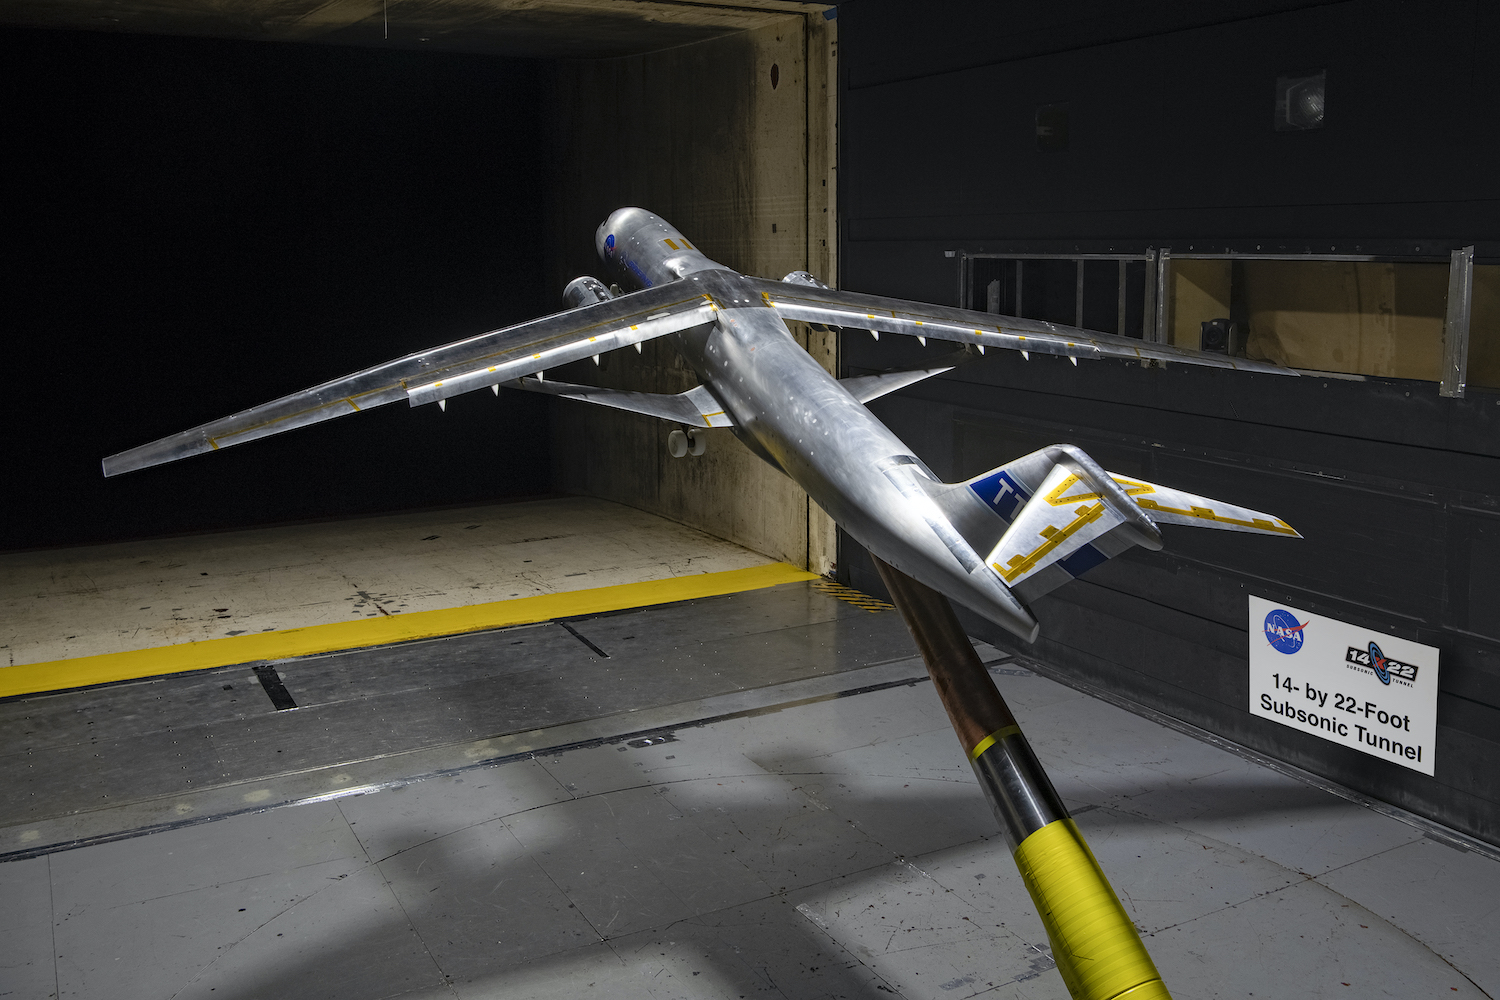 NASA’s weird wing design could lead to futuristic, fuel-efficient airplanes